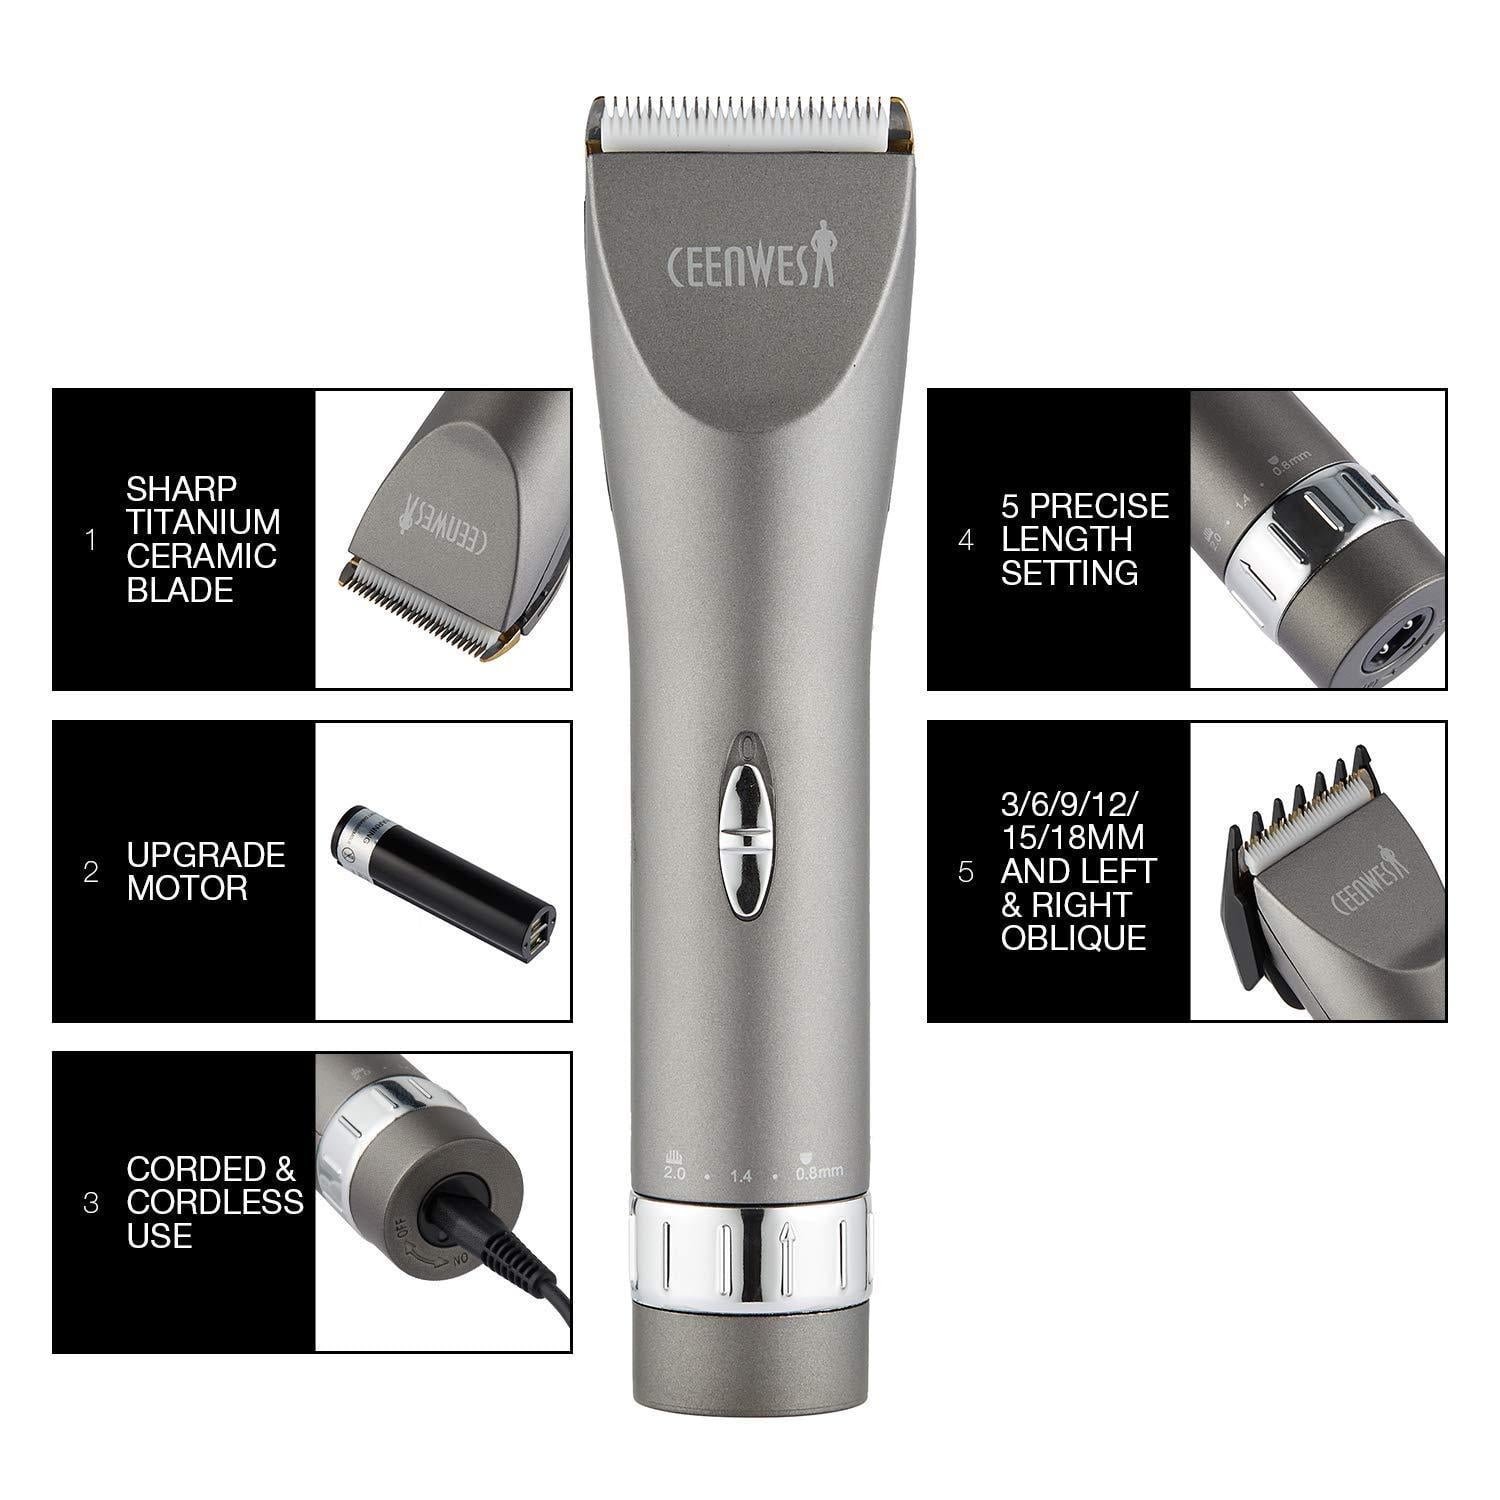 ceenwes updated version professional hair clippers